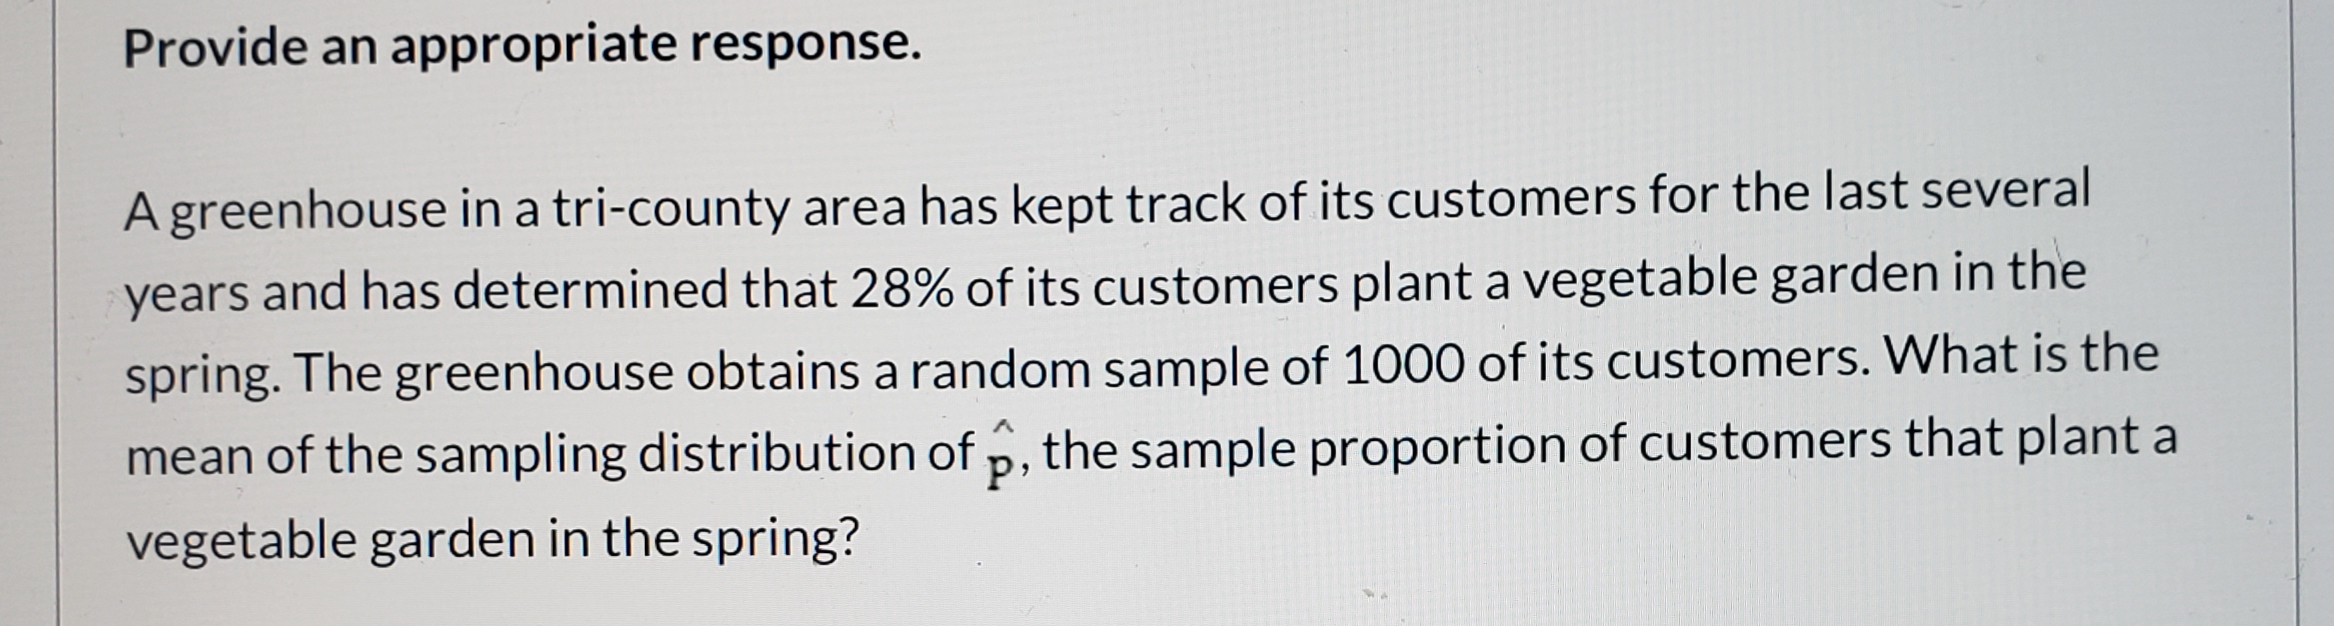 Provide an appropriate response.
A greenhouse in a tri-county area has kept track of its customers for the last several
years and has determined that 28% of its customers plant a vegetable garden in the
spring. The greenhouse obtains a random sample of 1000 of its customers. What is the
mean of the sampling distribution of p, the sample proportion of customers that plant a
vegetable garden in the spring?
